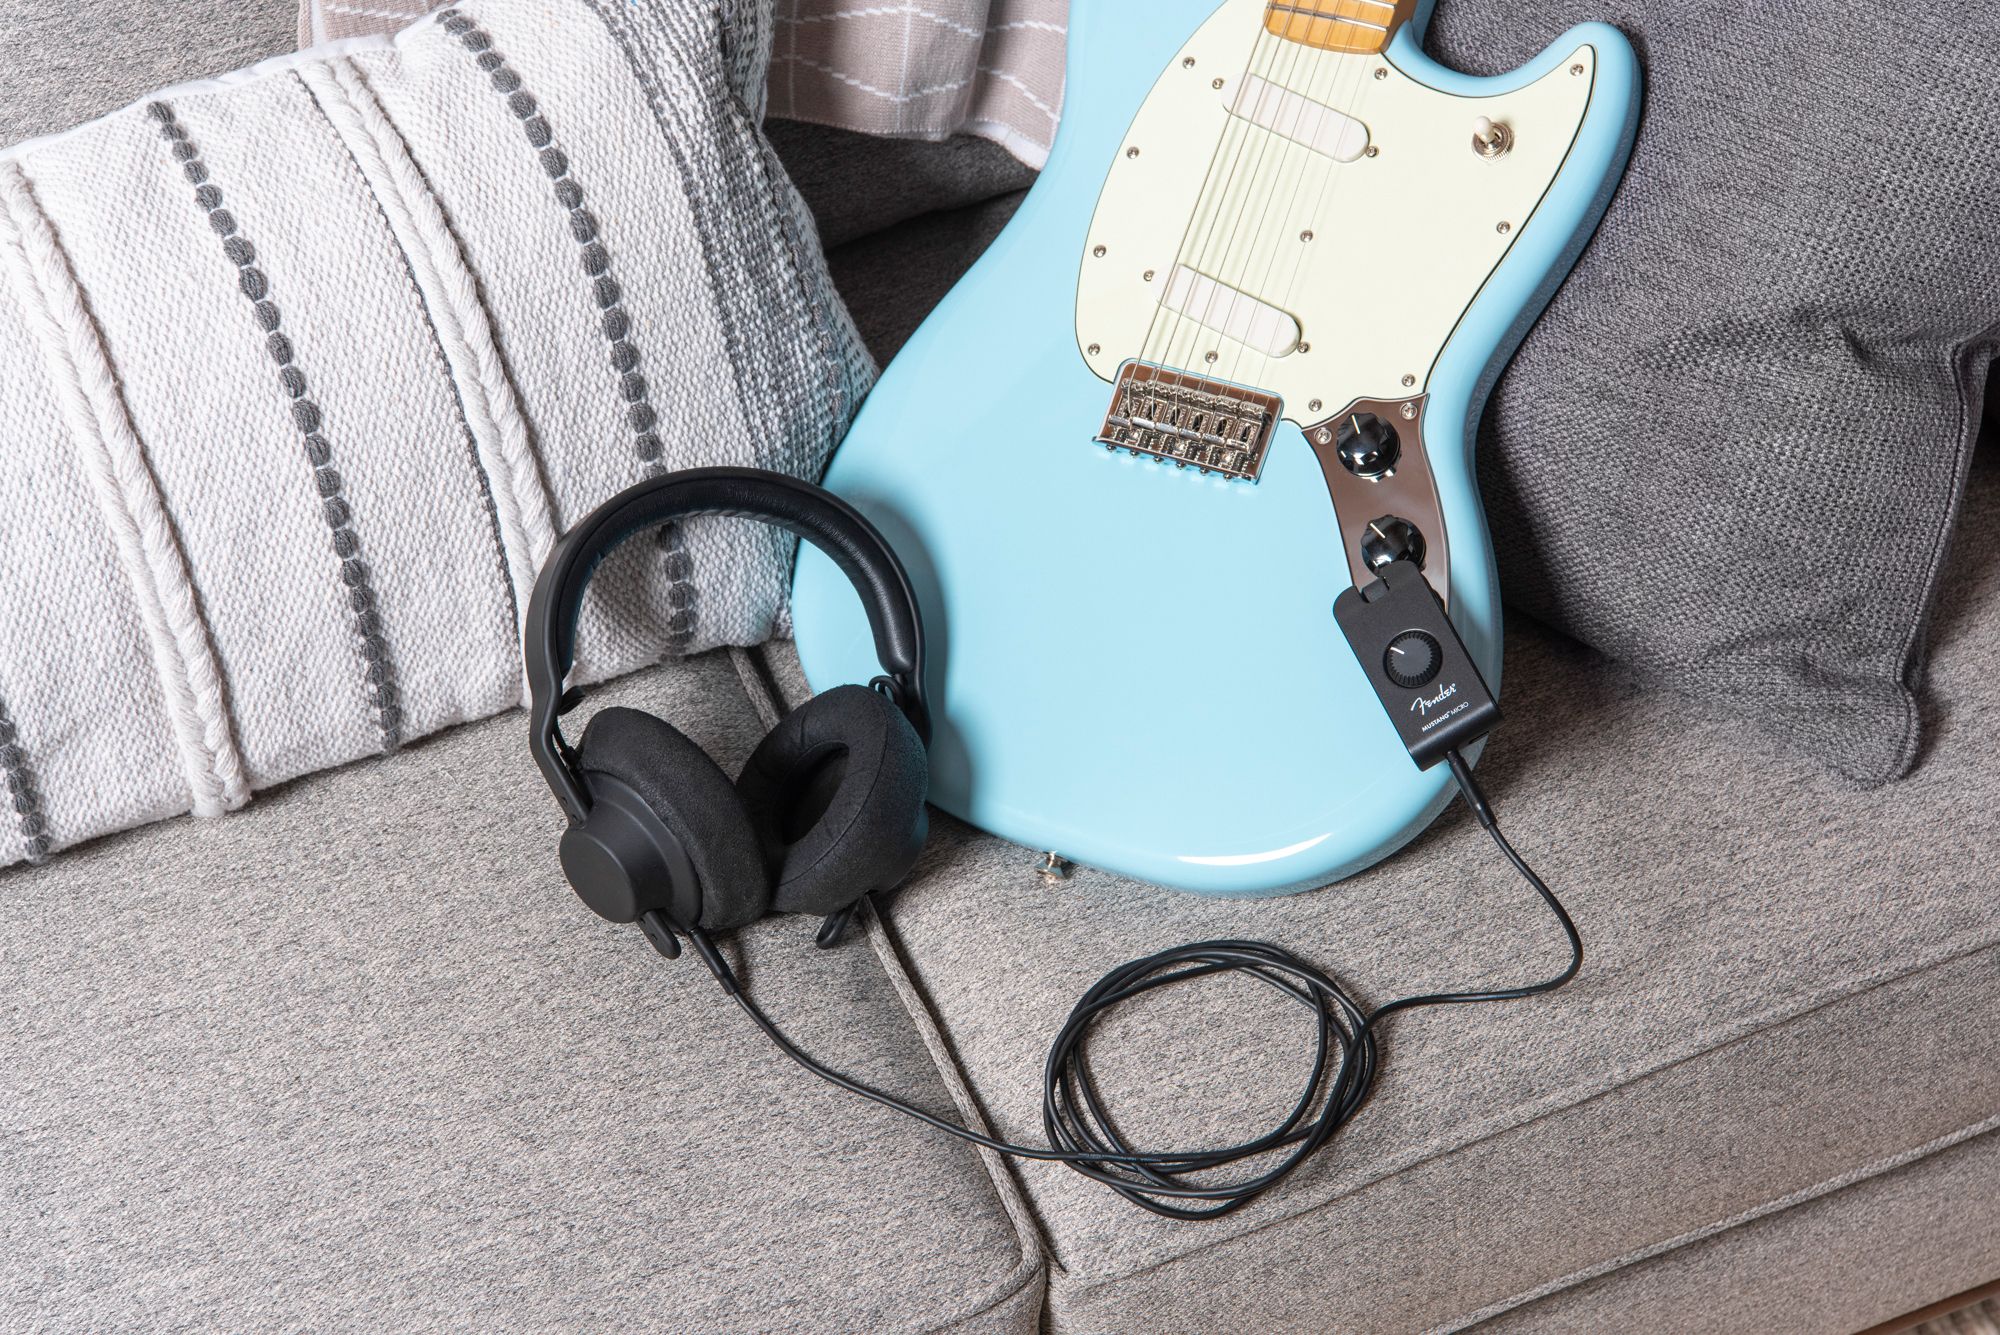 Fender Mustang Micro Review: The Perfect Portable Amp WIRED